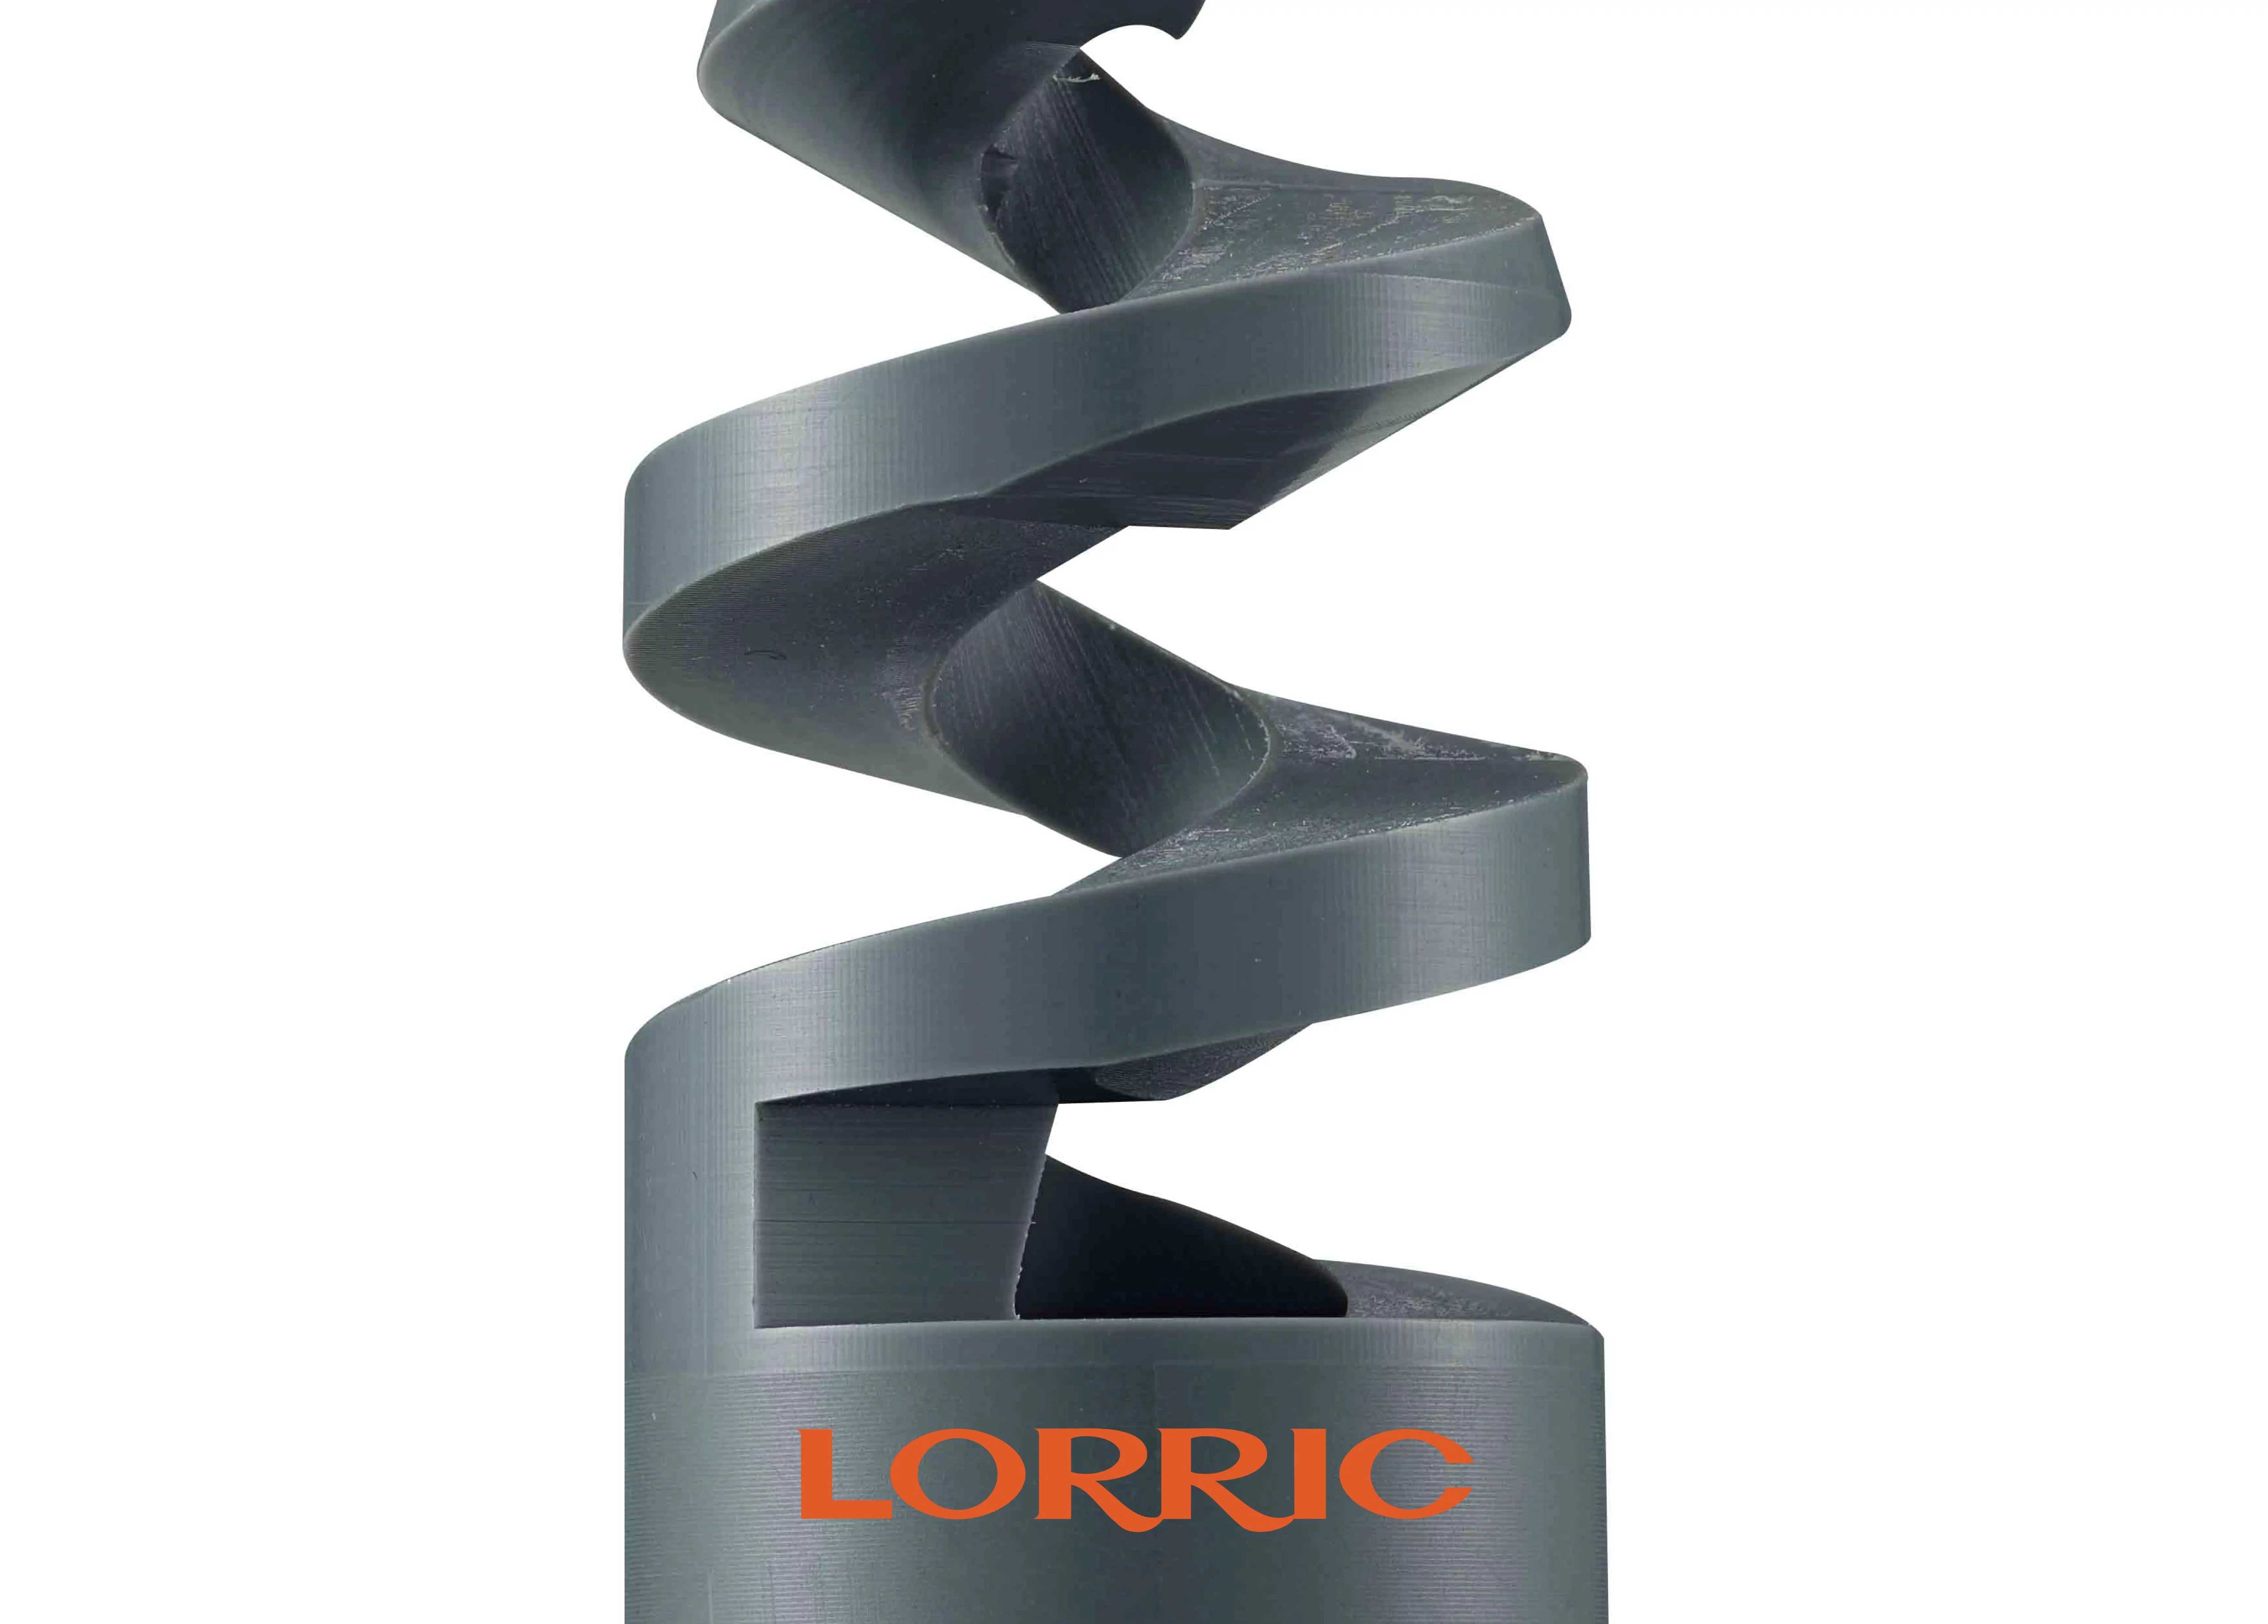 LORRIC specializes in the procurement of materials from top suppliers, never using recycled materials.